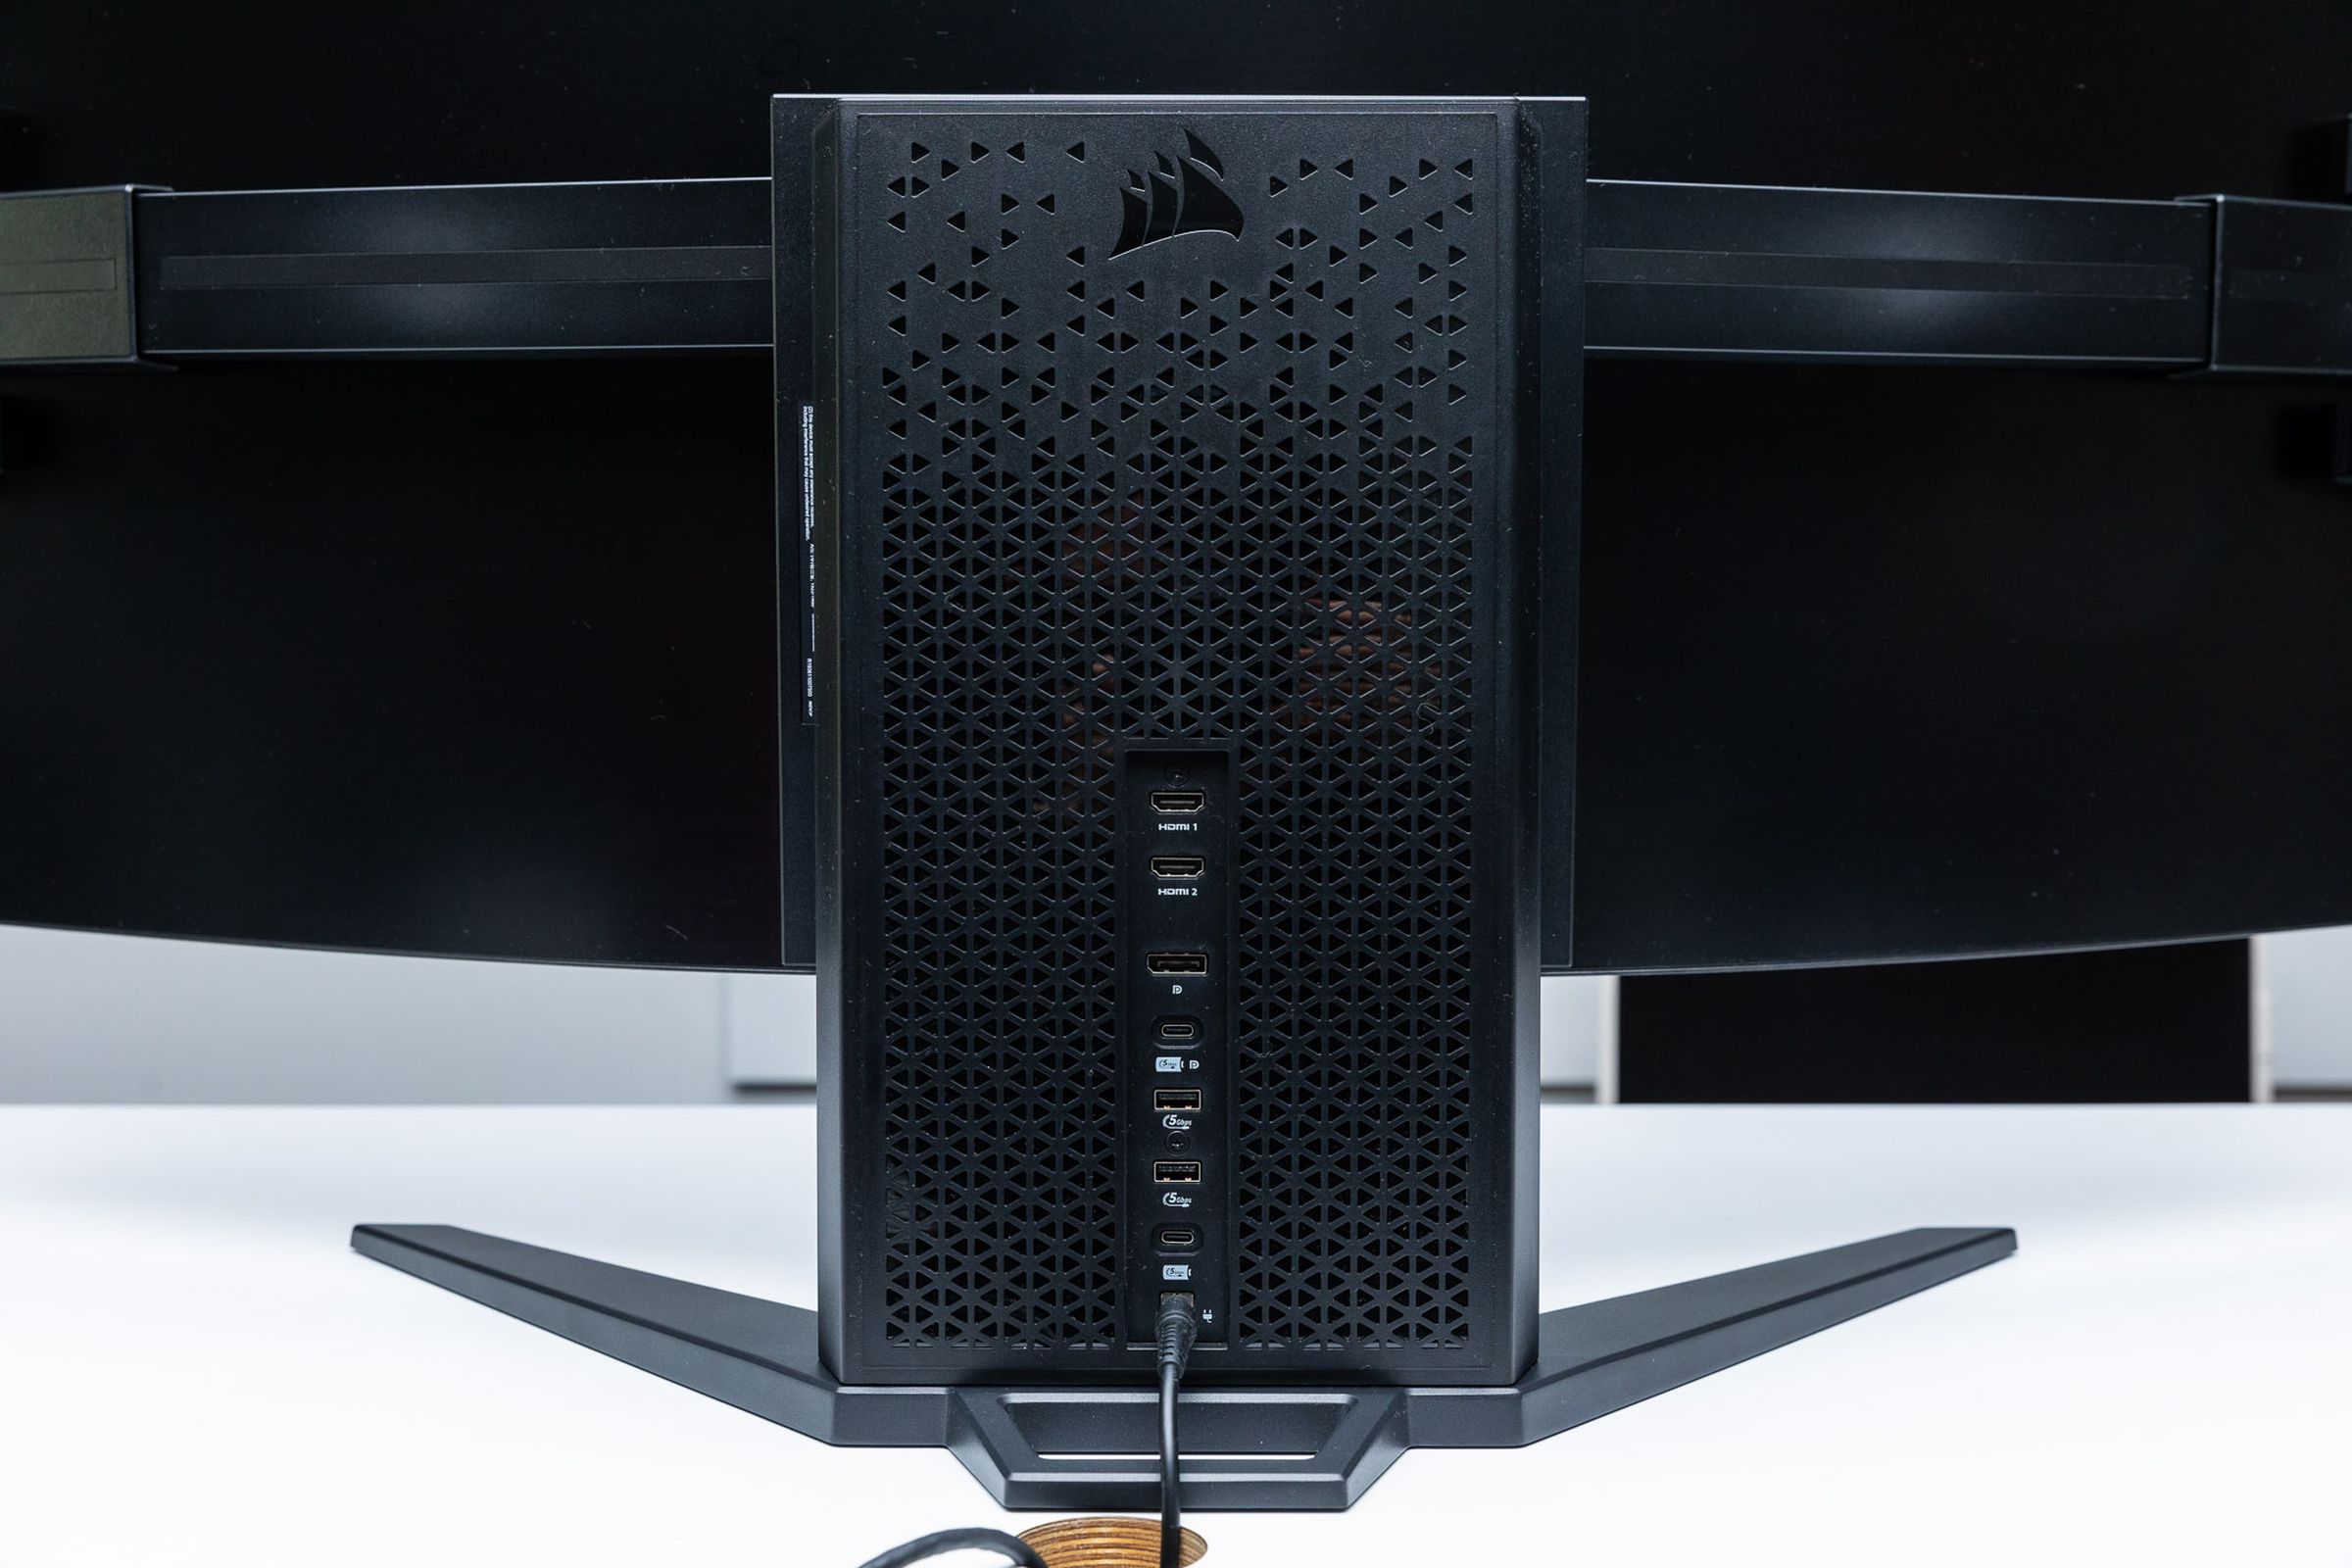 The backside of the Corsair Xeneon Flex’s stand, showcasing its DisplayPort, HDMI 2.1 ports, and USB ports for connecting accessories.